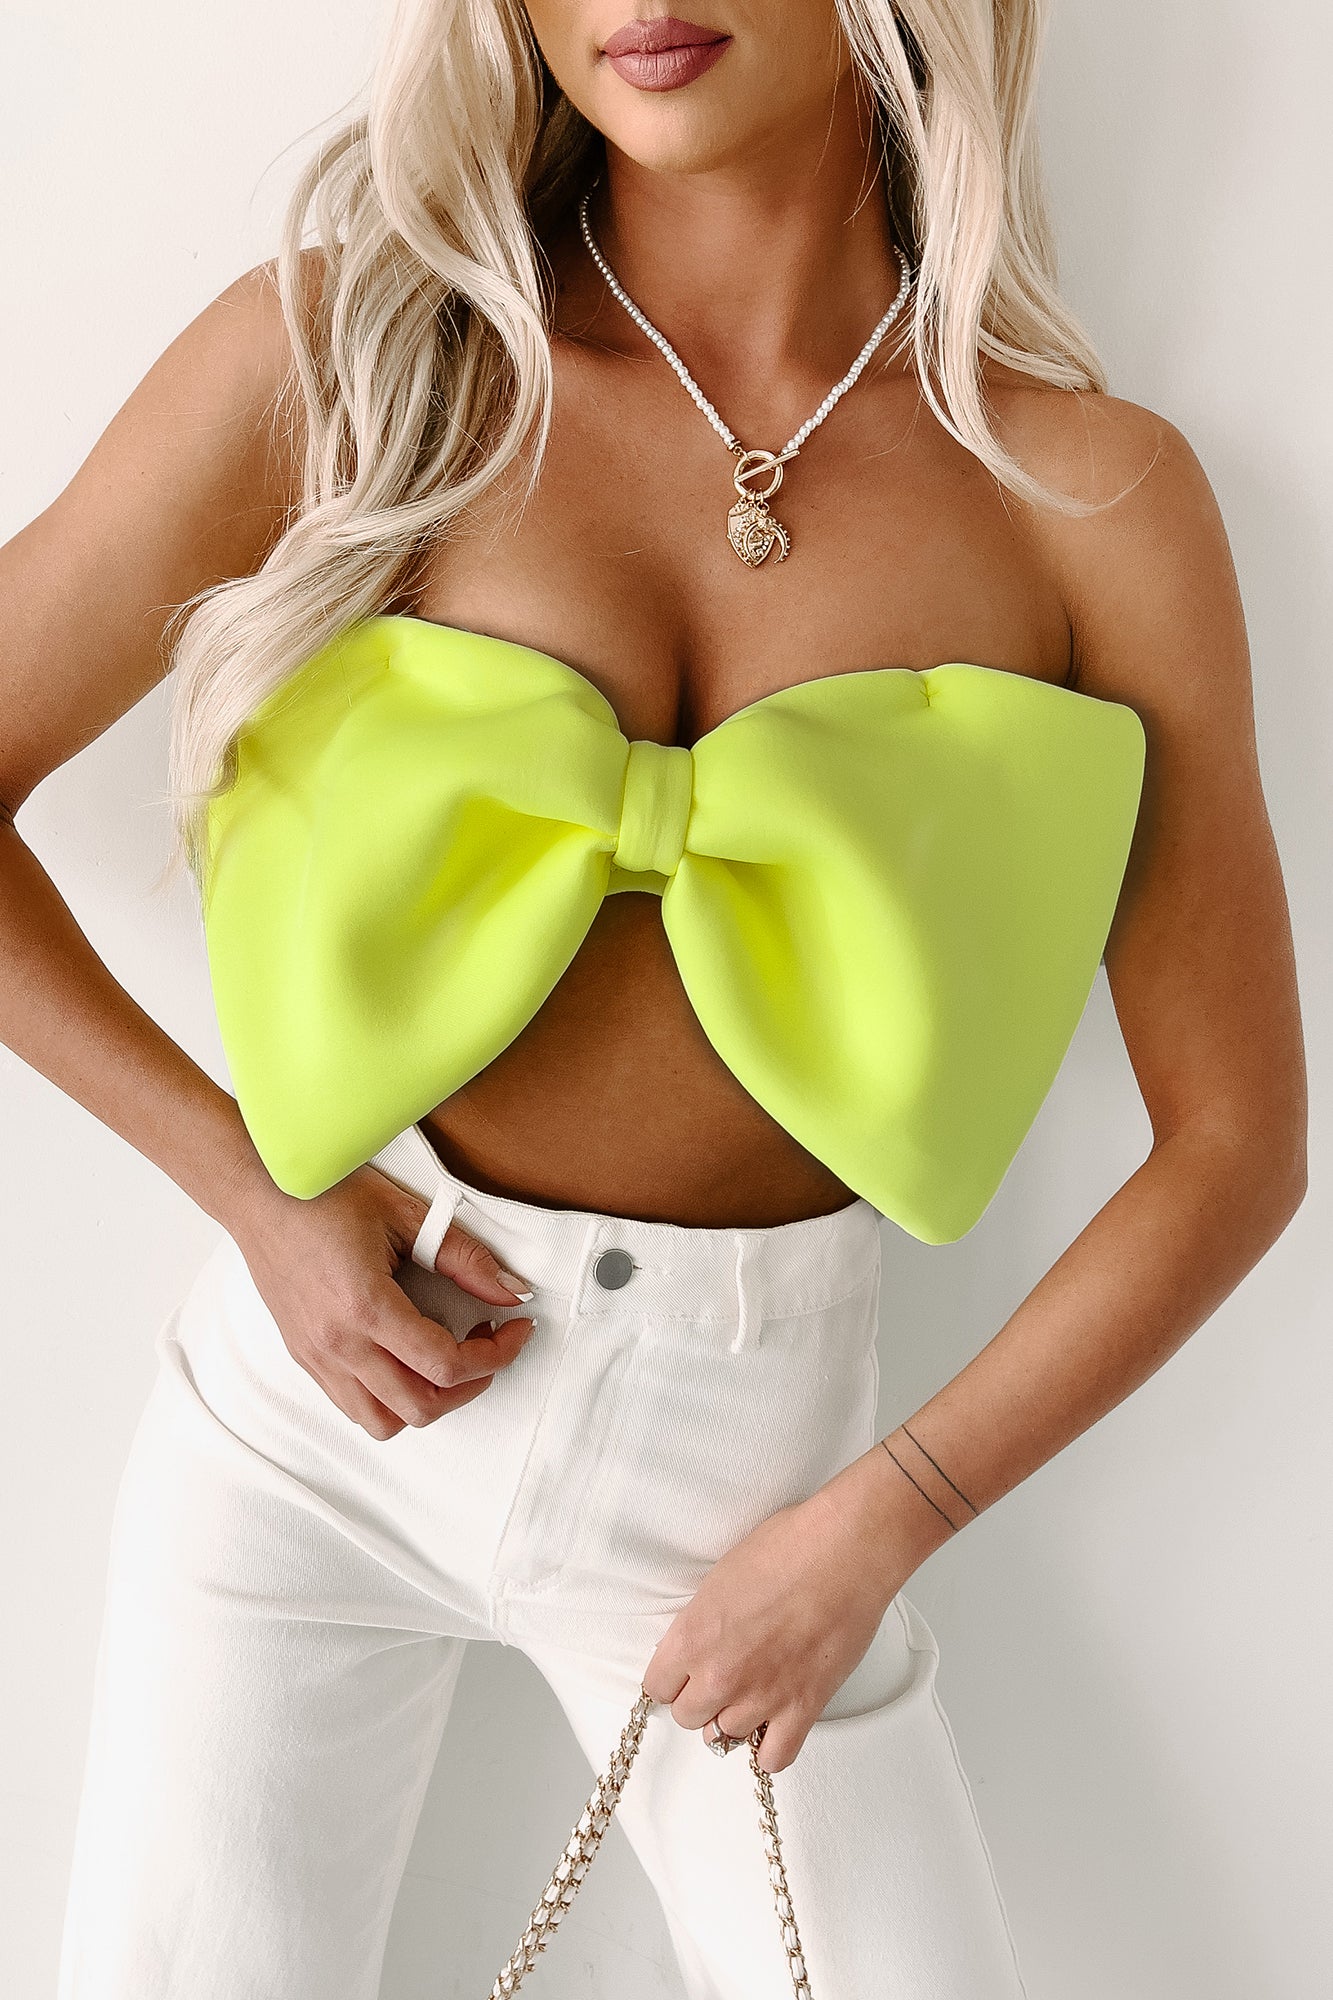 Women's Basic Layering Bandeau Bra Top - Strapless, Seamless, Wire-Free  Comfort REG and Plus Sizes (ONE Size 2-6, NEON Pink-NEON Yellow-NEON Green)  at  Women's Clothing store